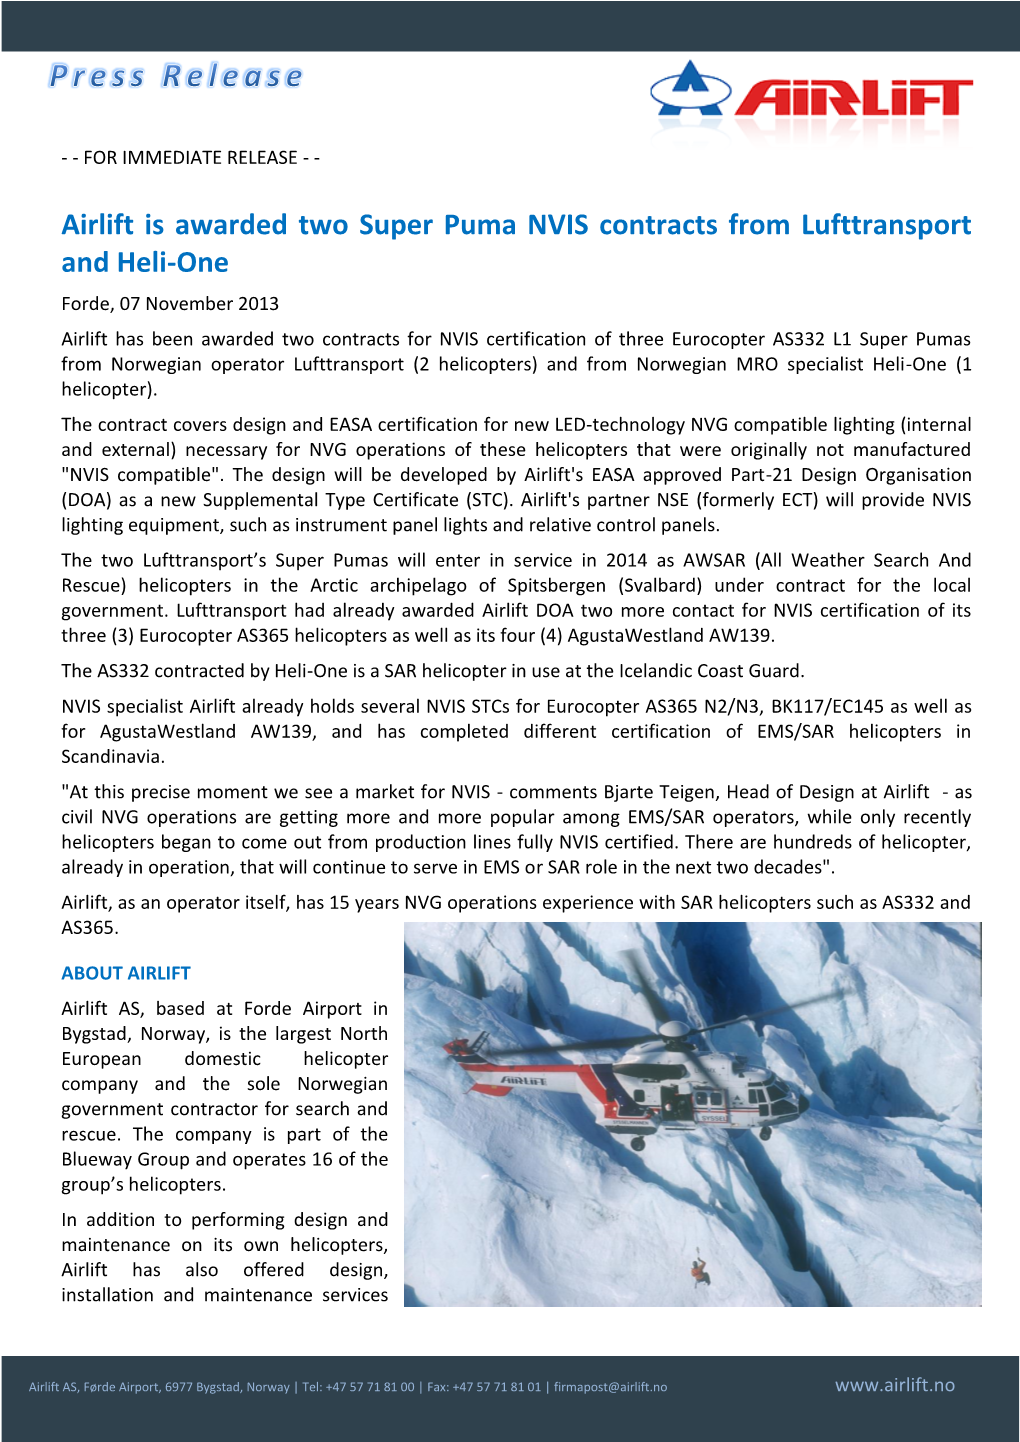 Airlift Is Awarded Two Super Puma NVIS Contracts from Lufttransport